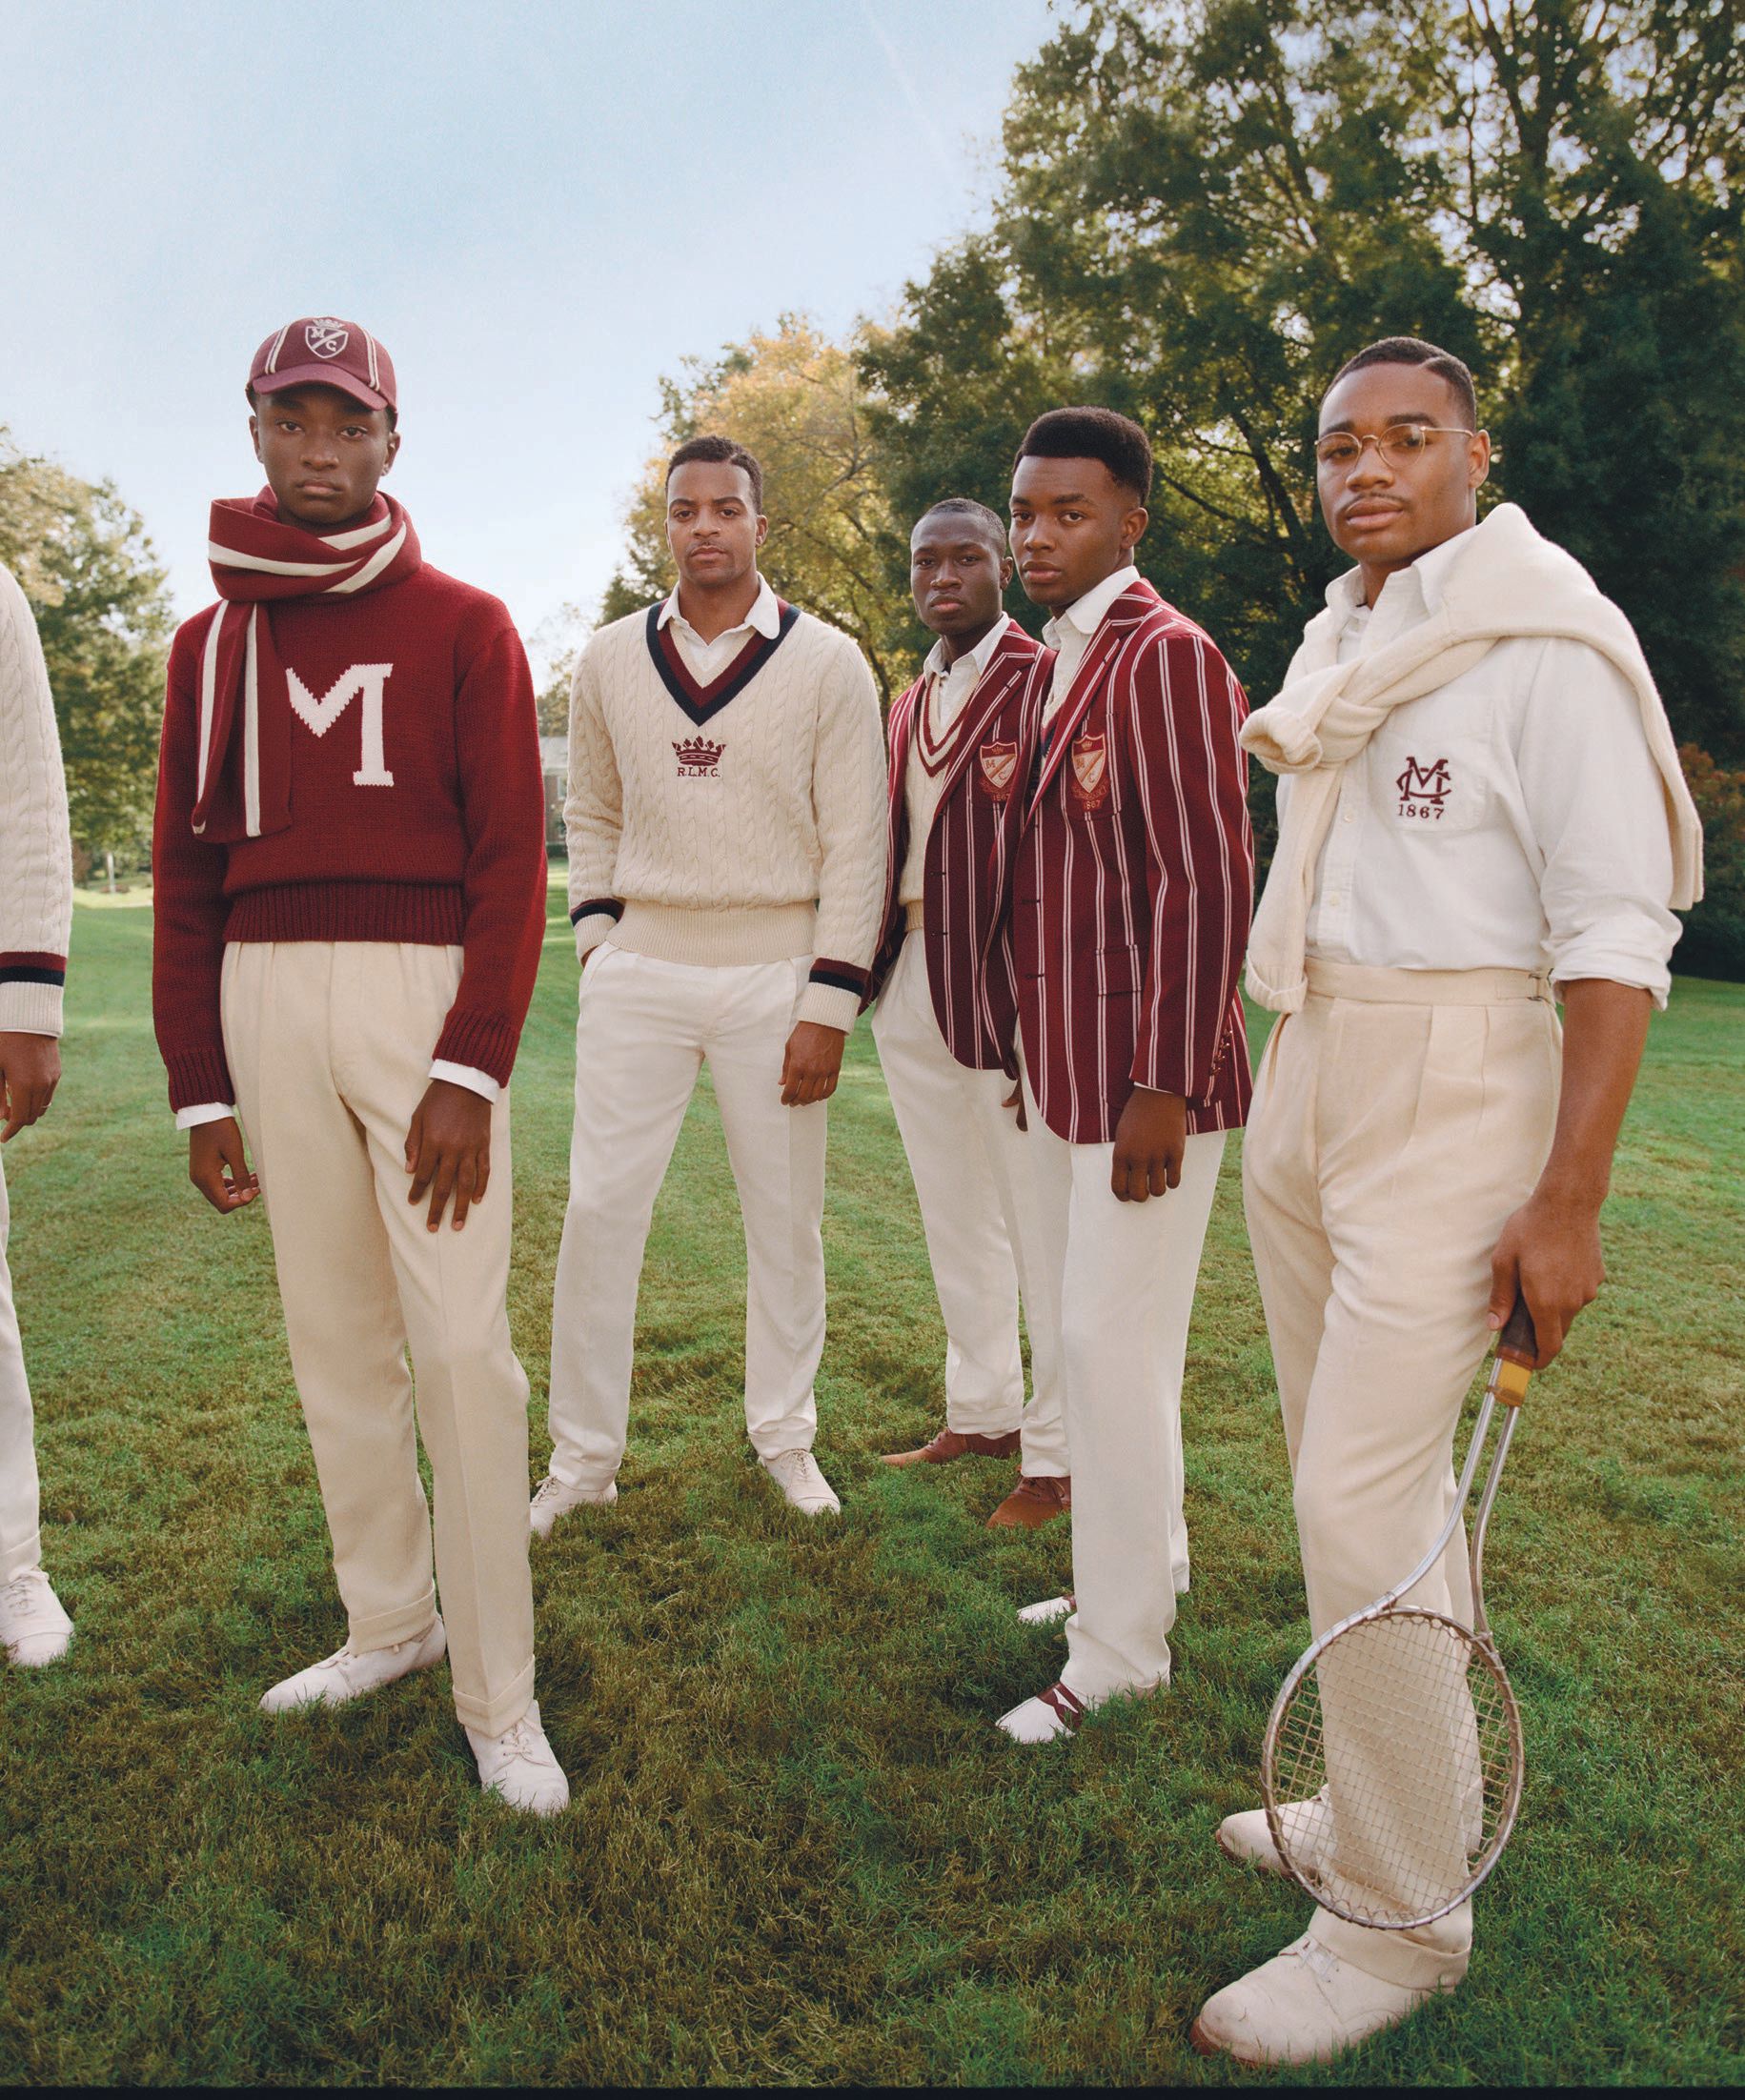 The Morehouse Collection cotton ball cap, “M” sweater, Cricket sweater and Cricket blazer, ralphlauren.com. PHOTO BY NADINE IJEWERE/POLO RALPH LAUREN